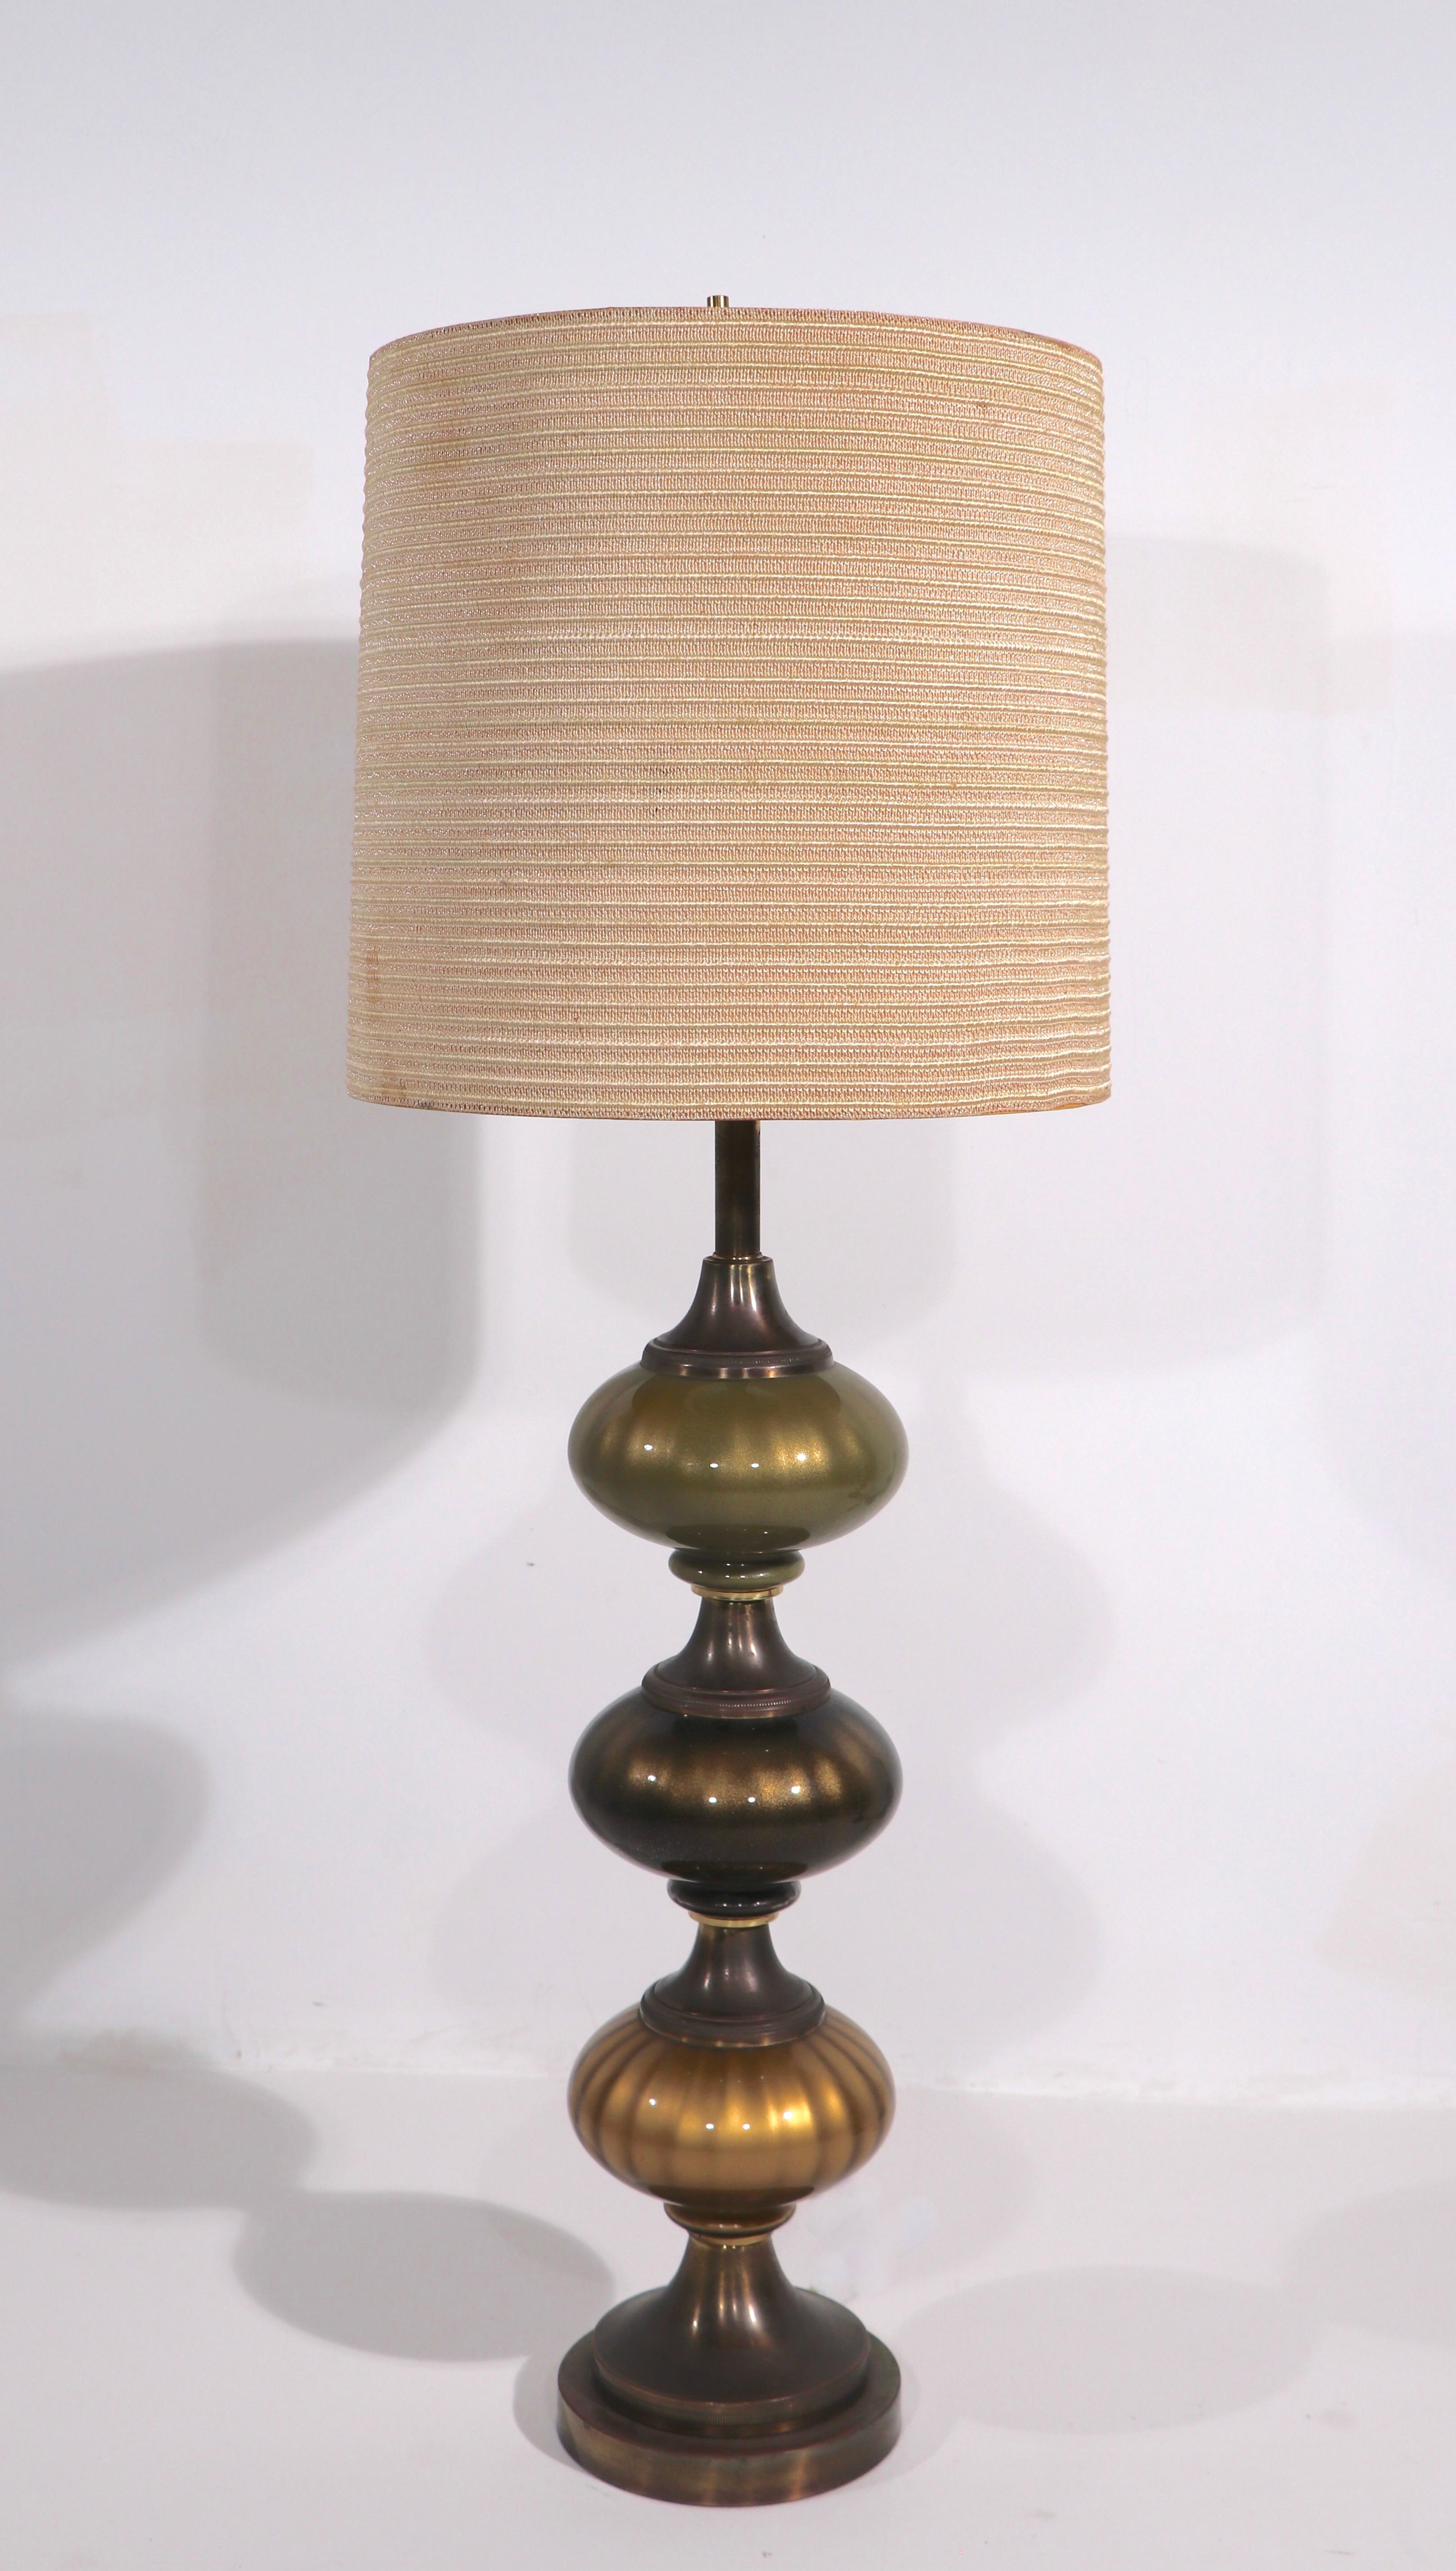 20th Century Pair of Tall Stacked Glass Orb Table Lamps